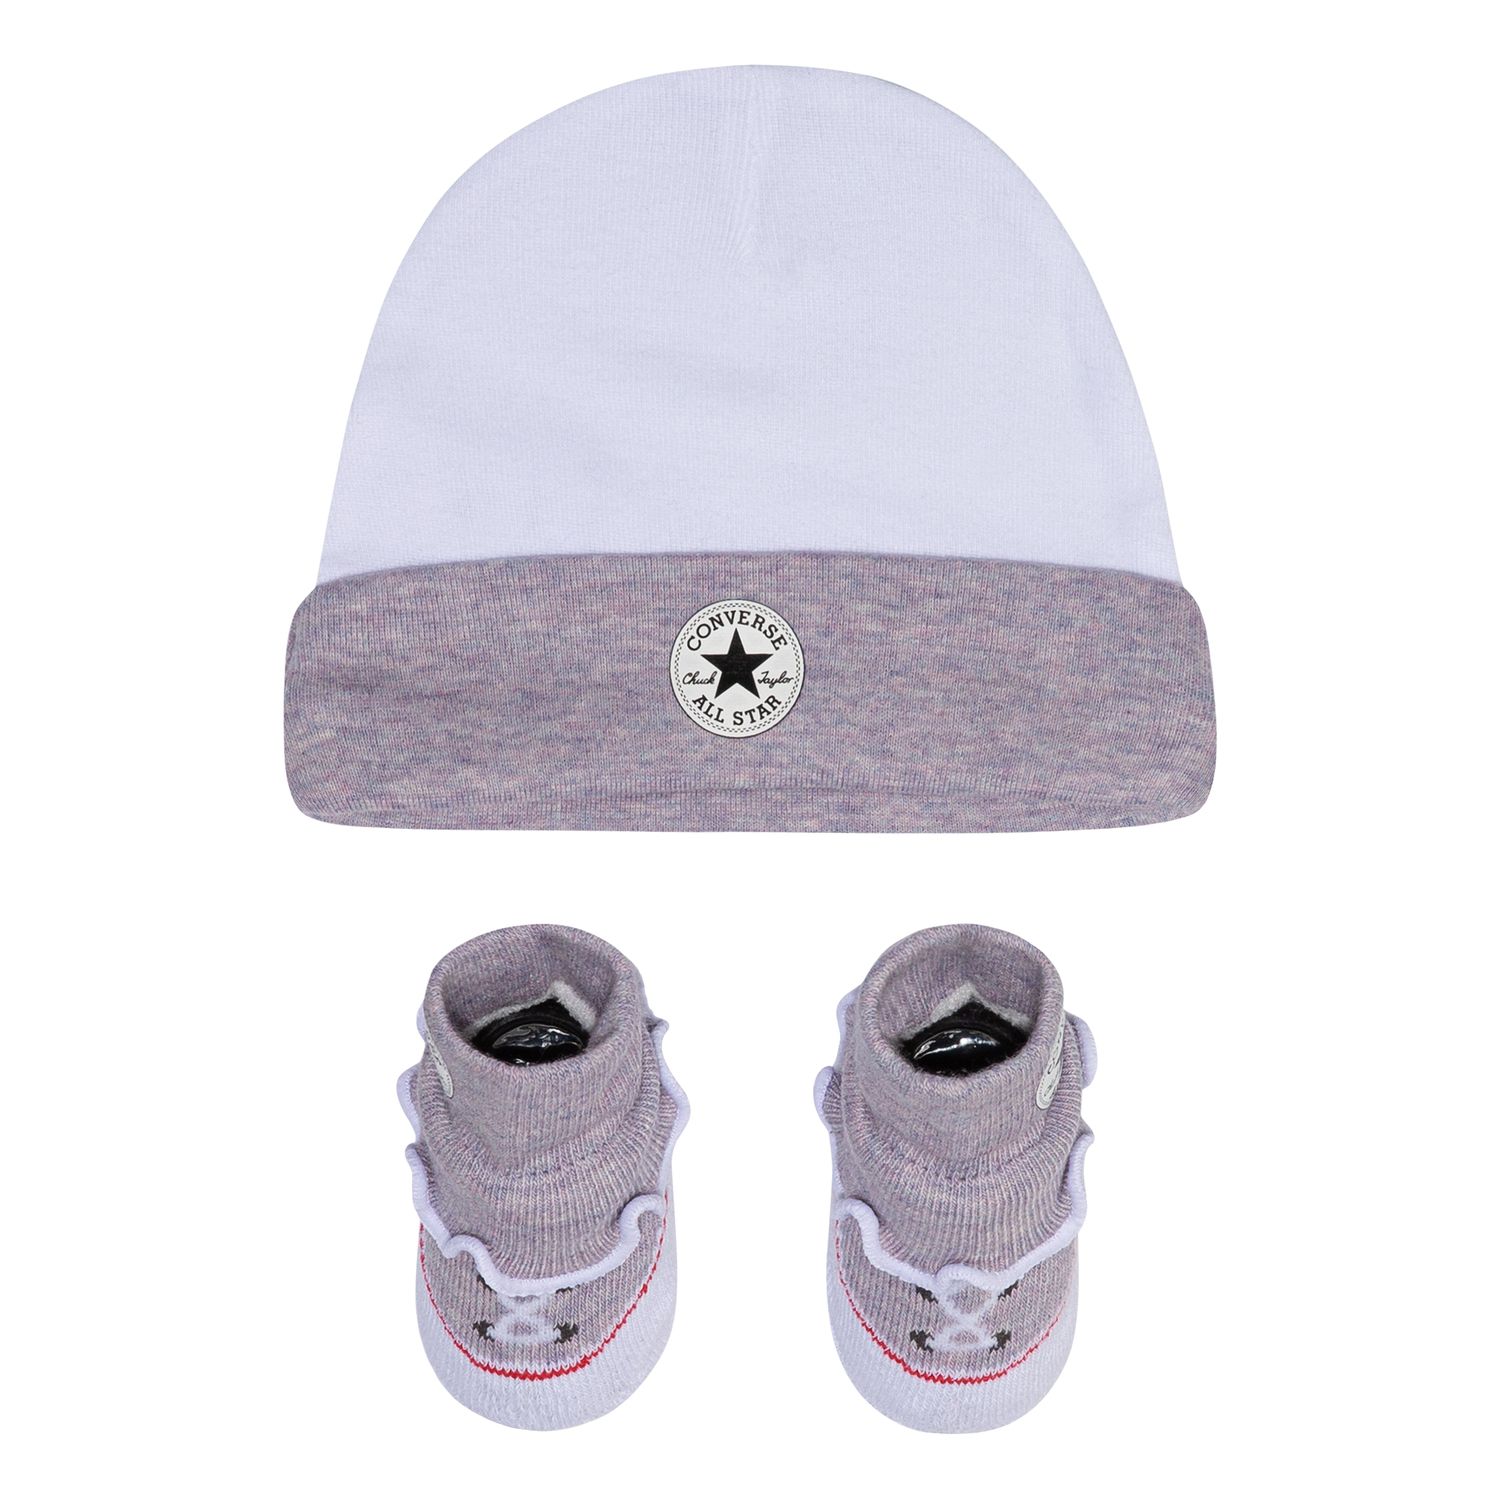 converse baby socks and hat